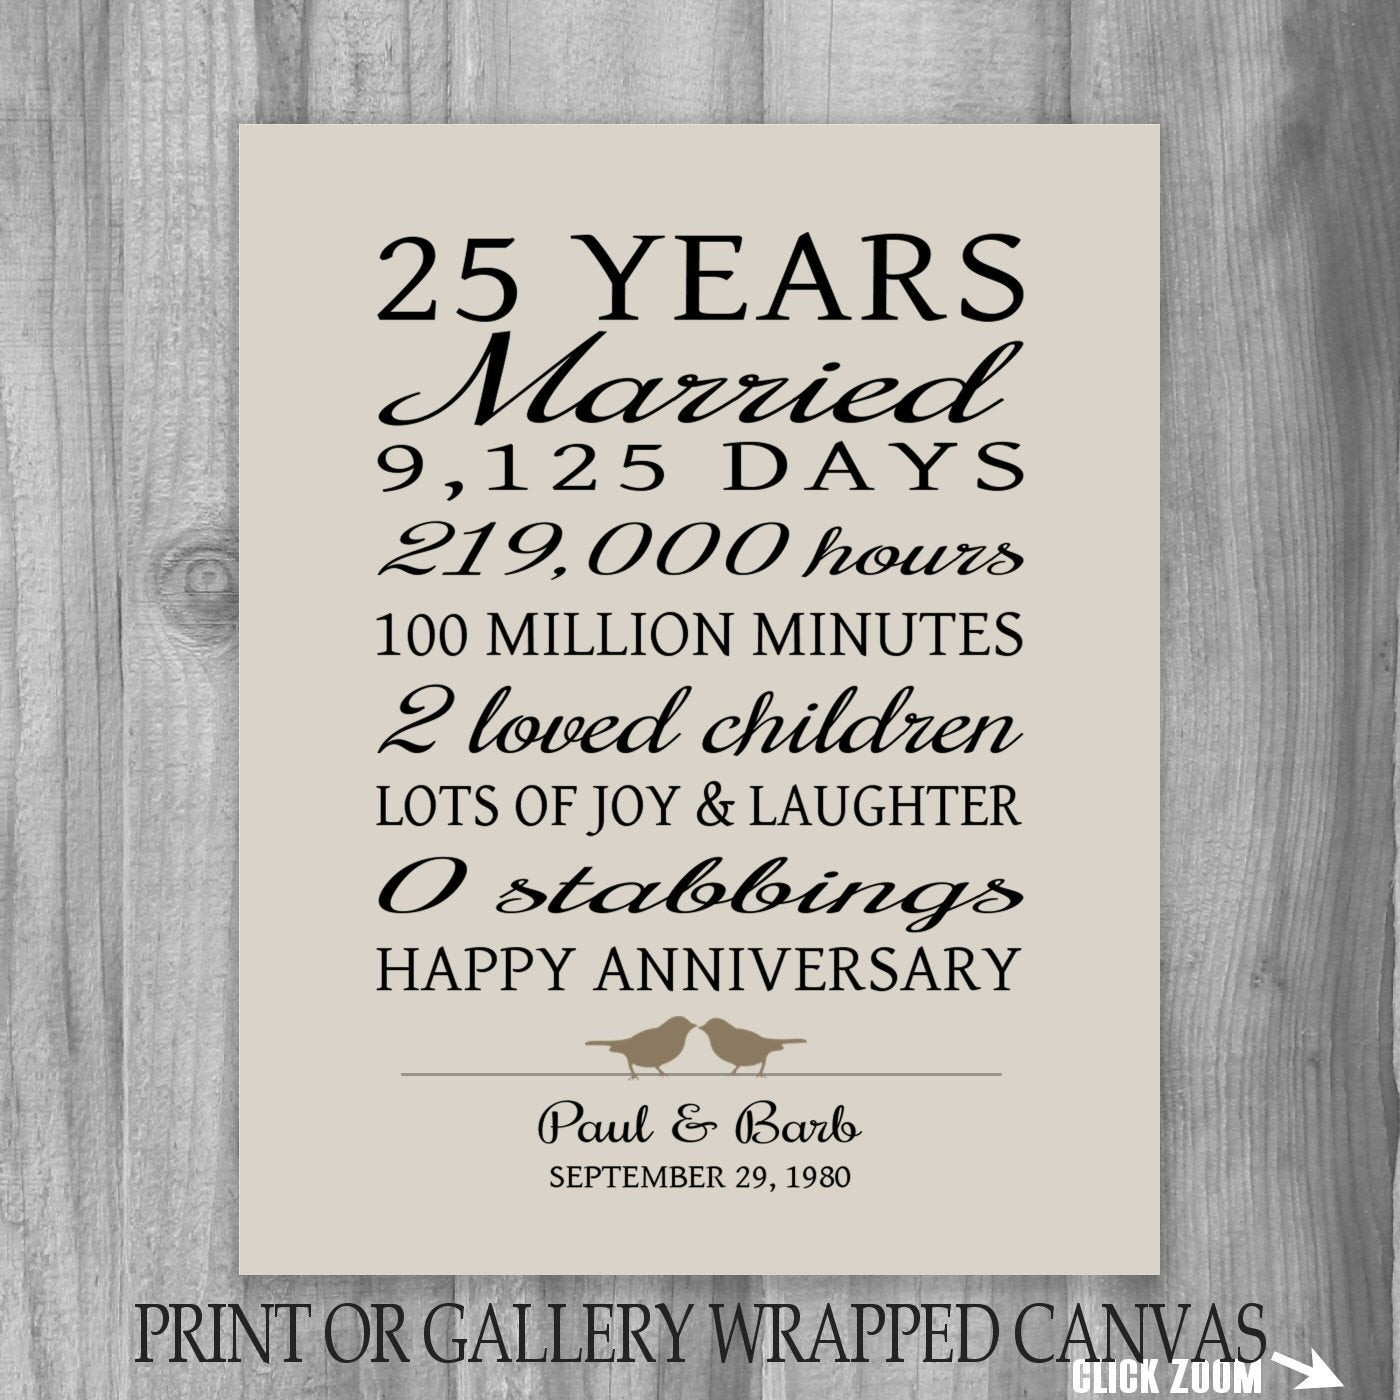 25Th Anniversary Gift Ideas For Parents
 25 Year Anniversary Gift 25th Anniversary Art Print